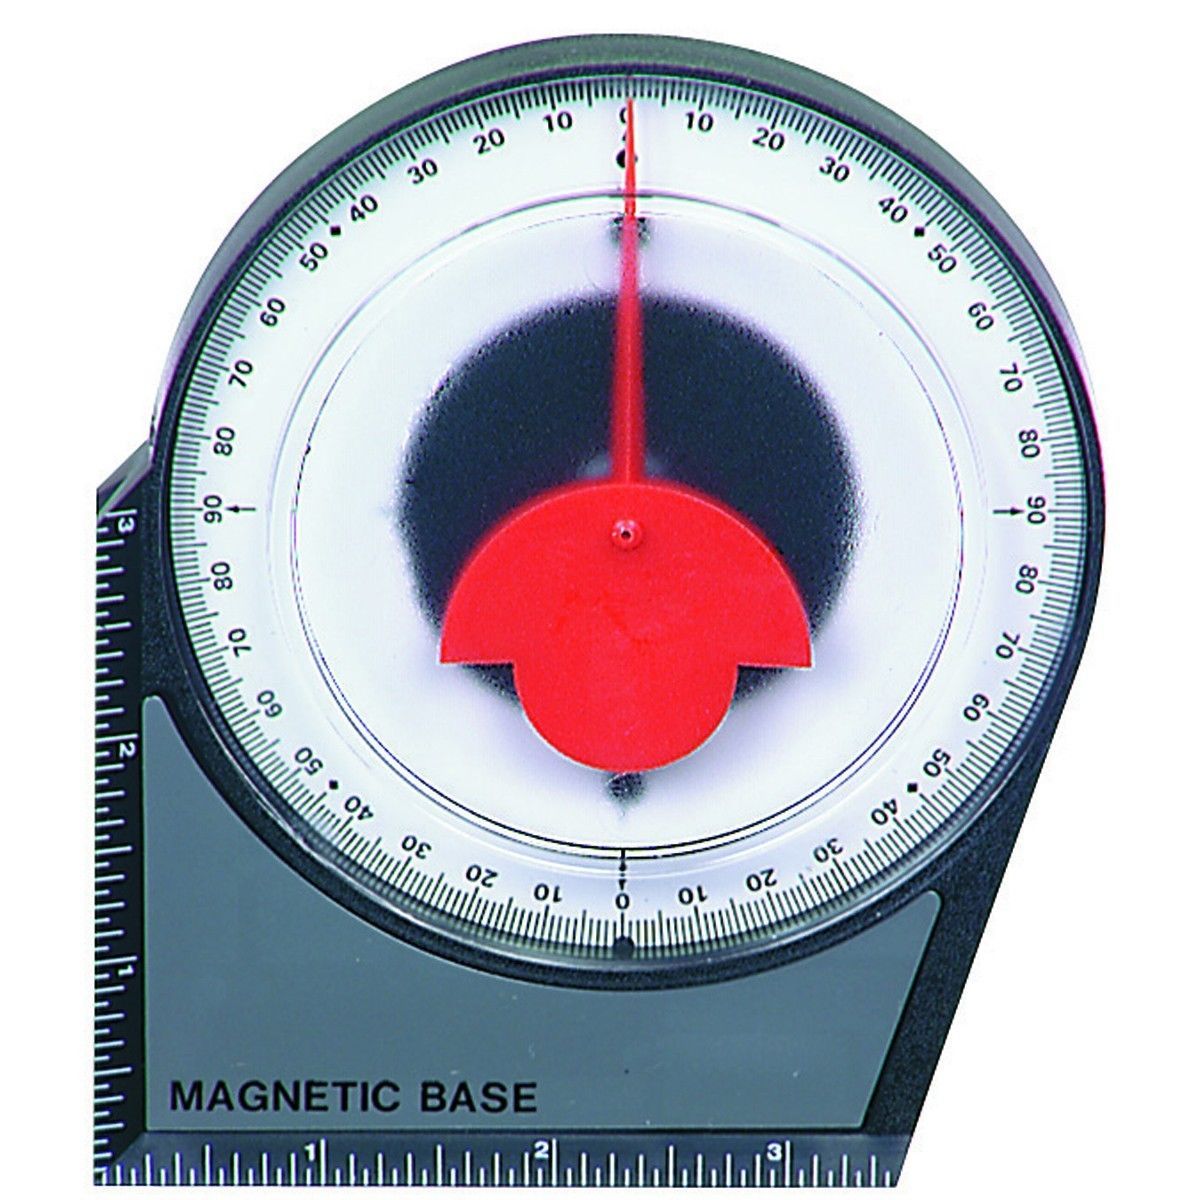 Brand New, Accurate to 0.5° Dial Gauge Angle Finder,  Magnetic Base - $9.95